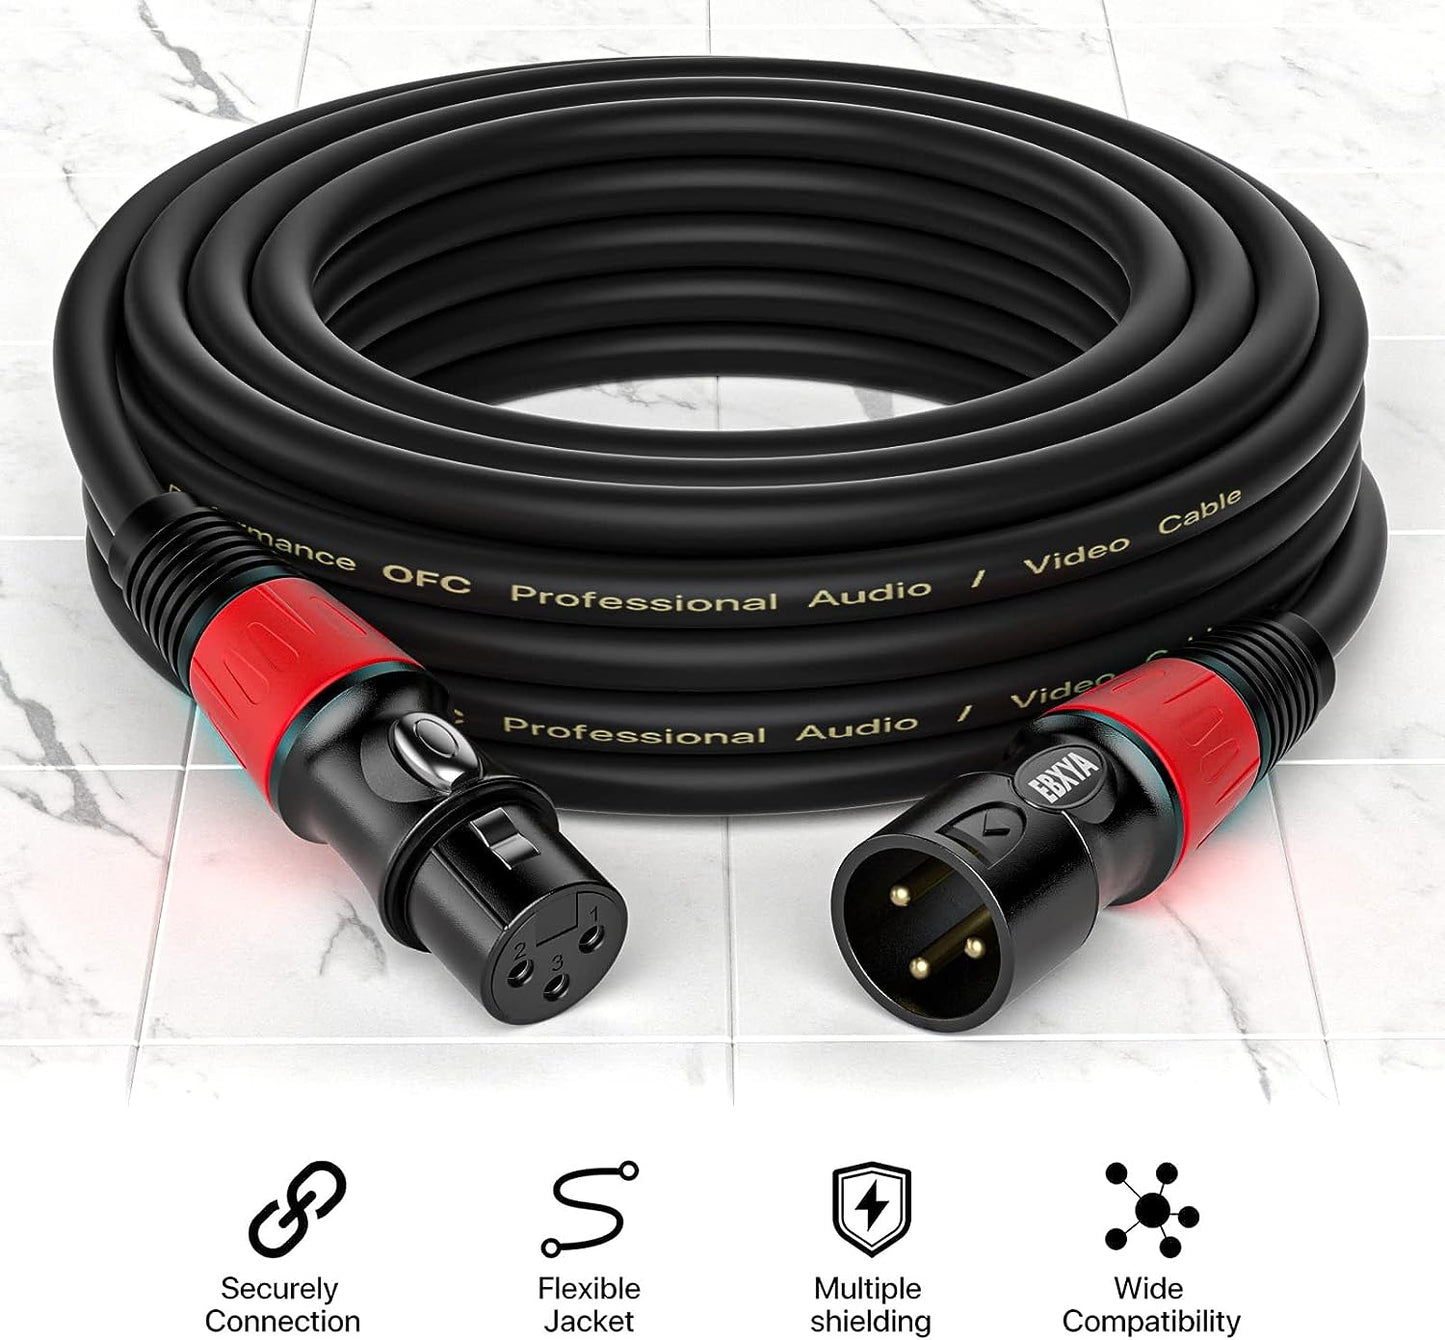 EBXYA XLR Cables Standard XLR Male to Female Microphone Cable with 3-Pin Balanced Shielded XLR Speaker Cable